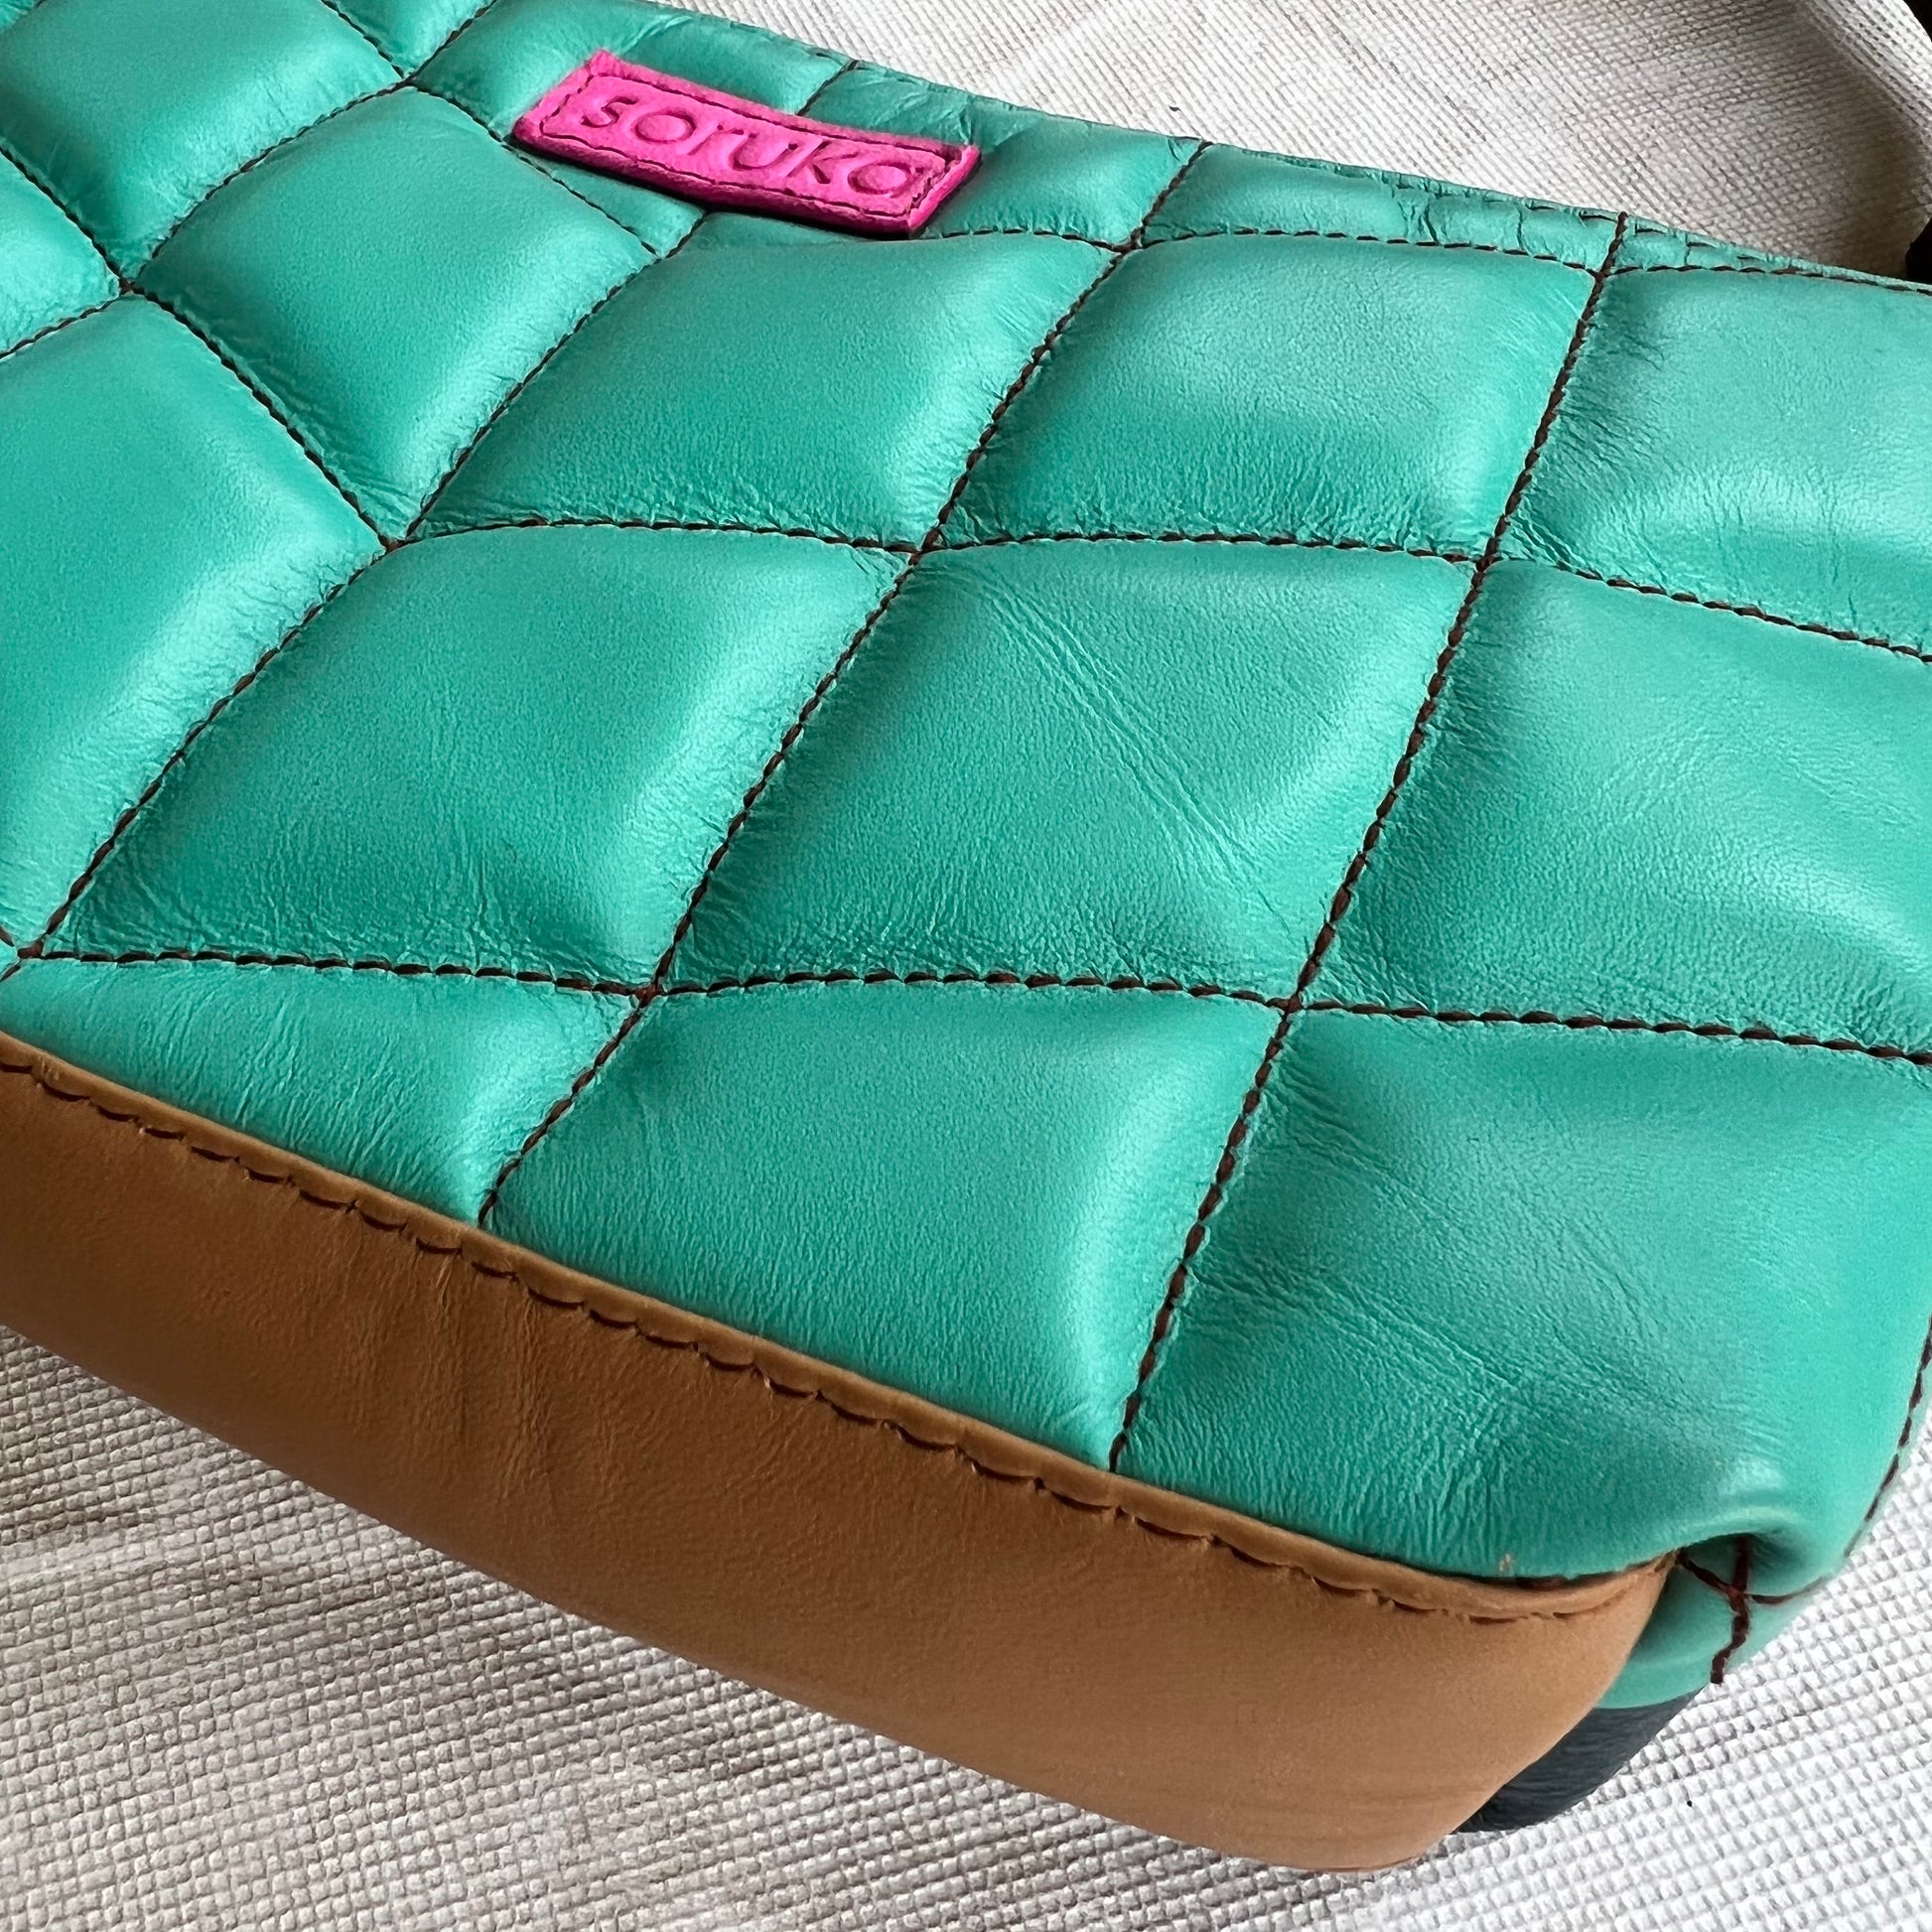 angled bottom view of seafoam green purse with brown base.